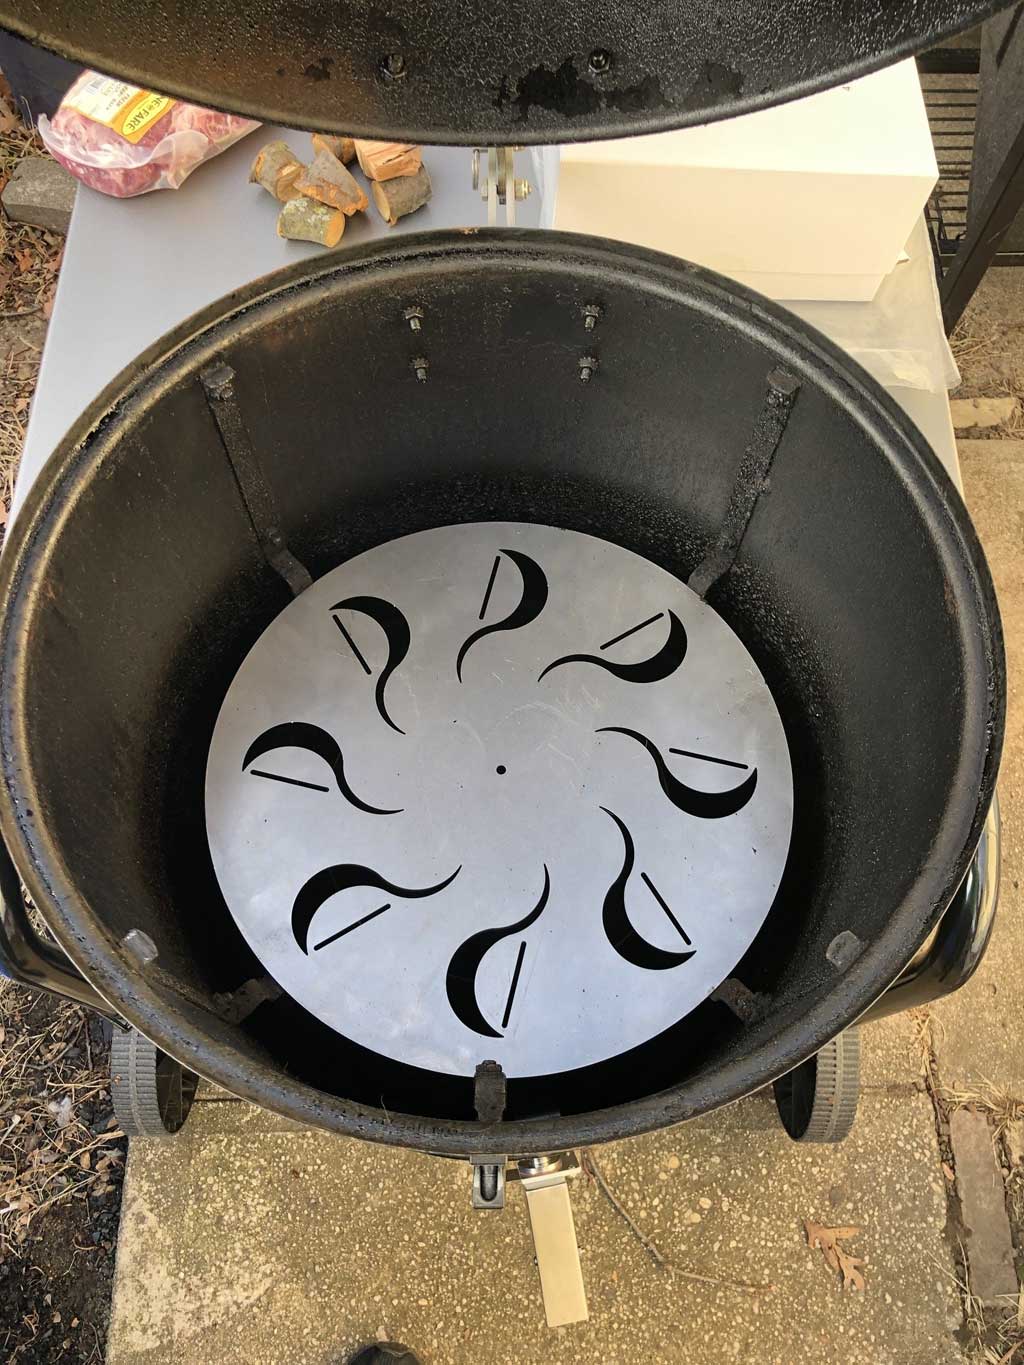 FireDial diffuser in WSM